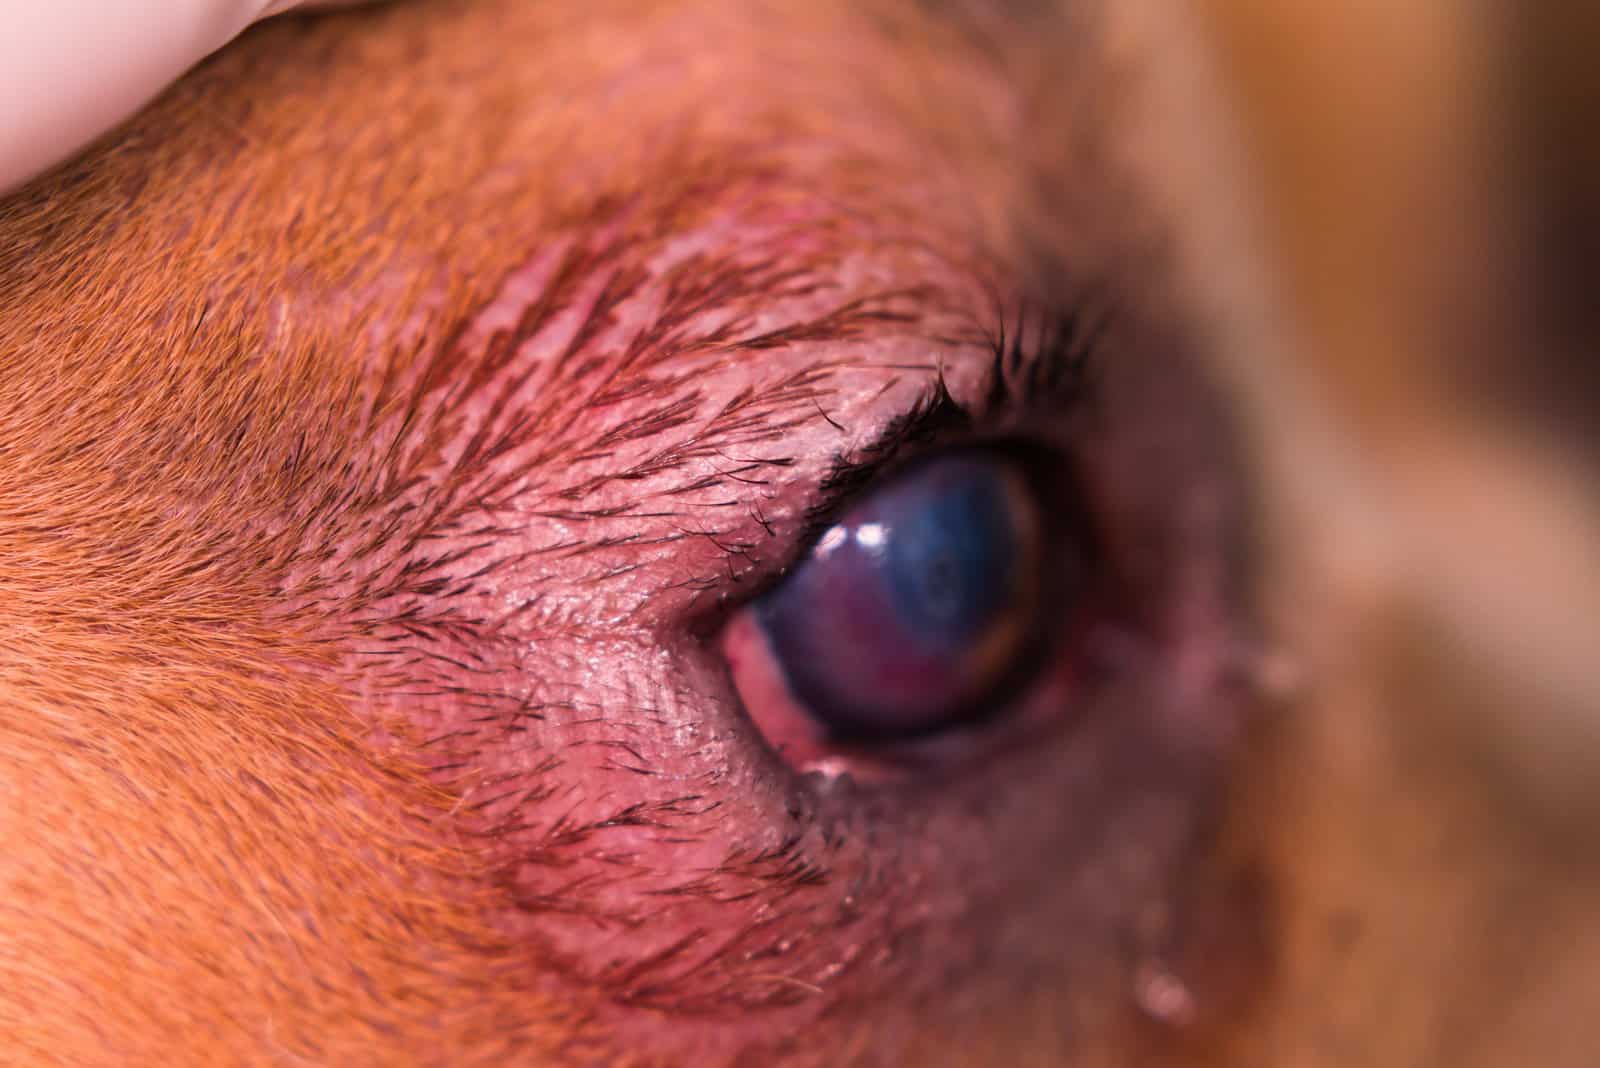 american bully dog breed with entropion and corneal ulcer